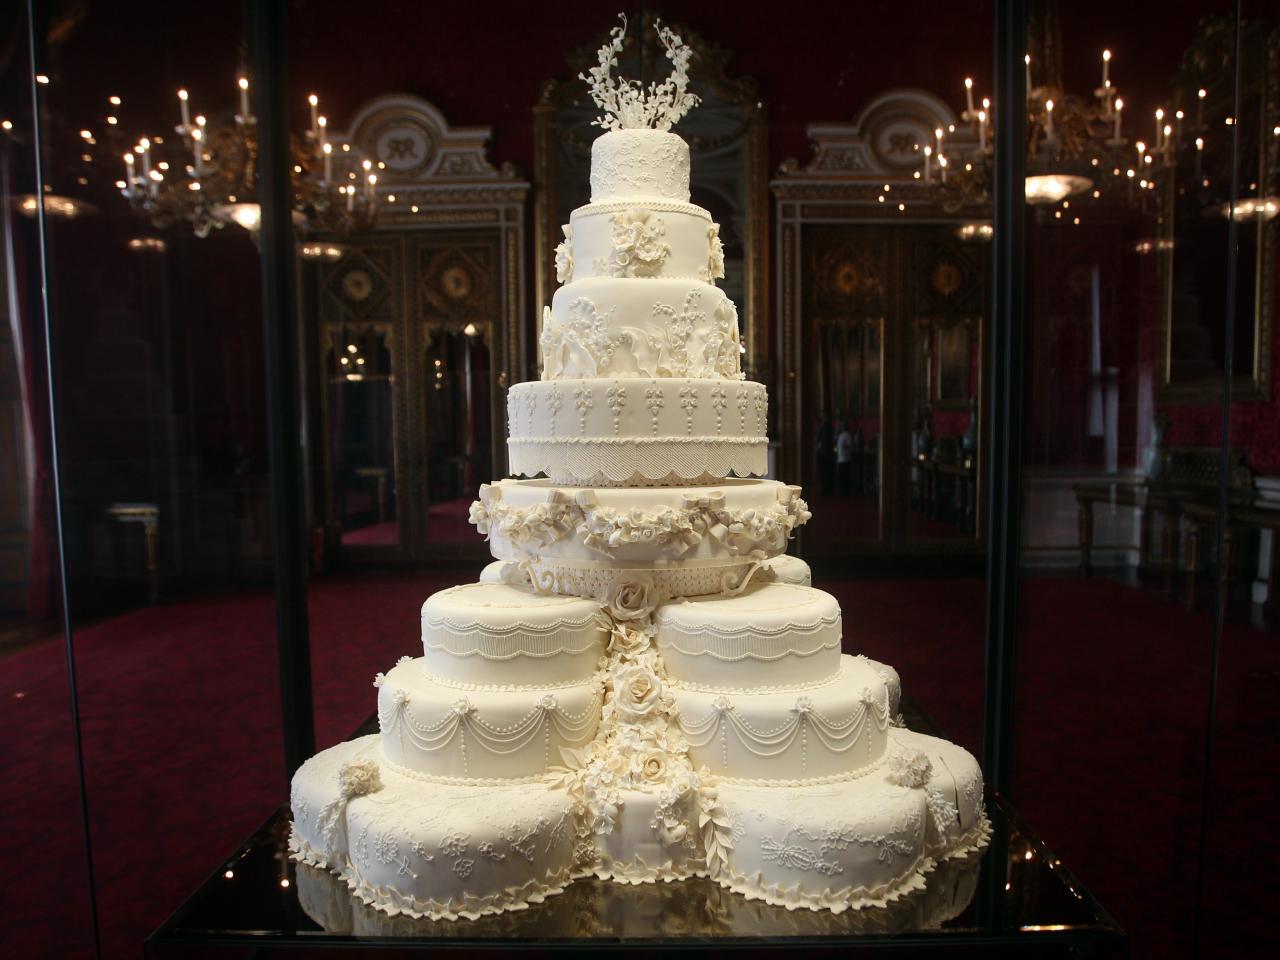 Cake Boss - This beautiful Carlo's Bakery wedding cake reminded us of one  of our favorite Buddy Valastro wedding creations: http://ow.ly/OX9Oi |  Facebook